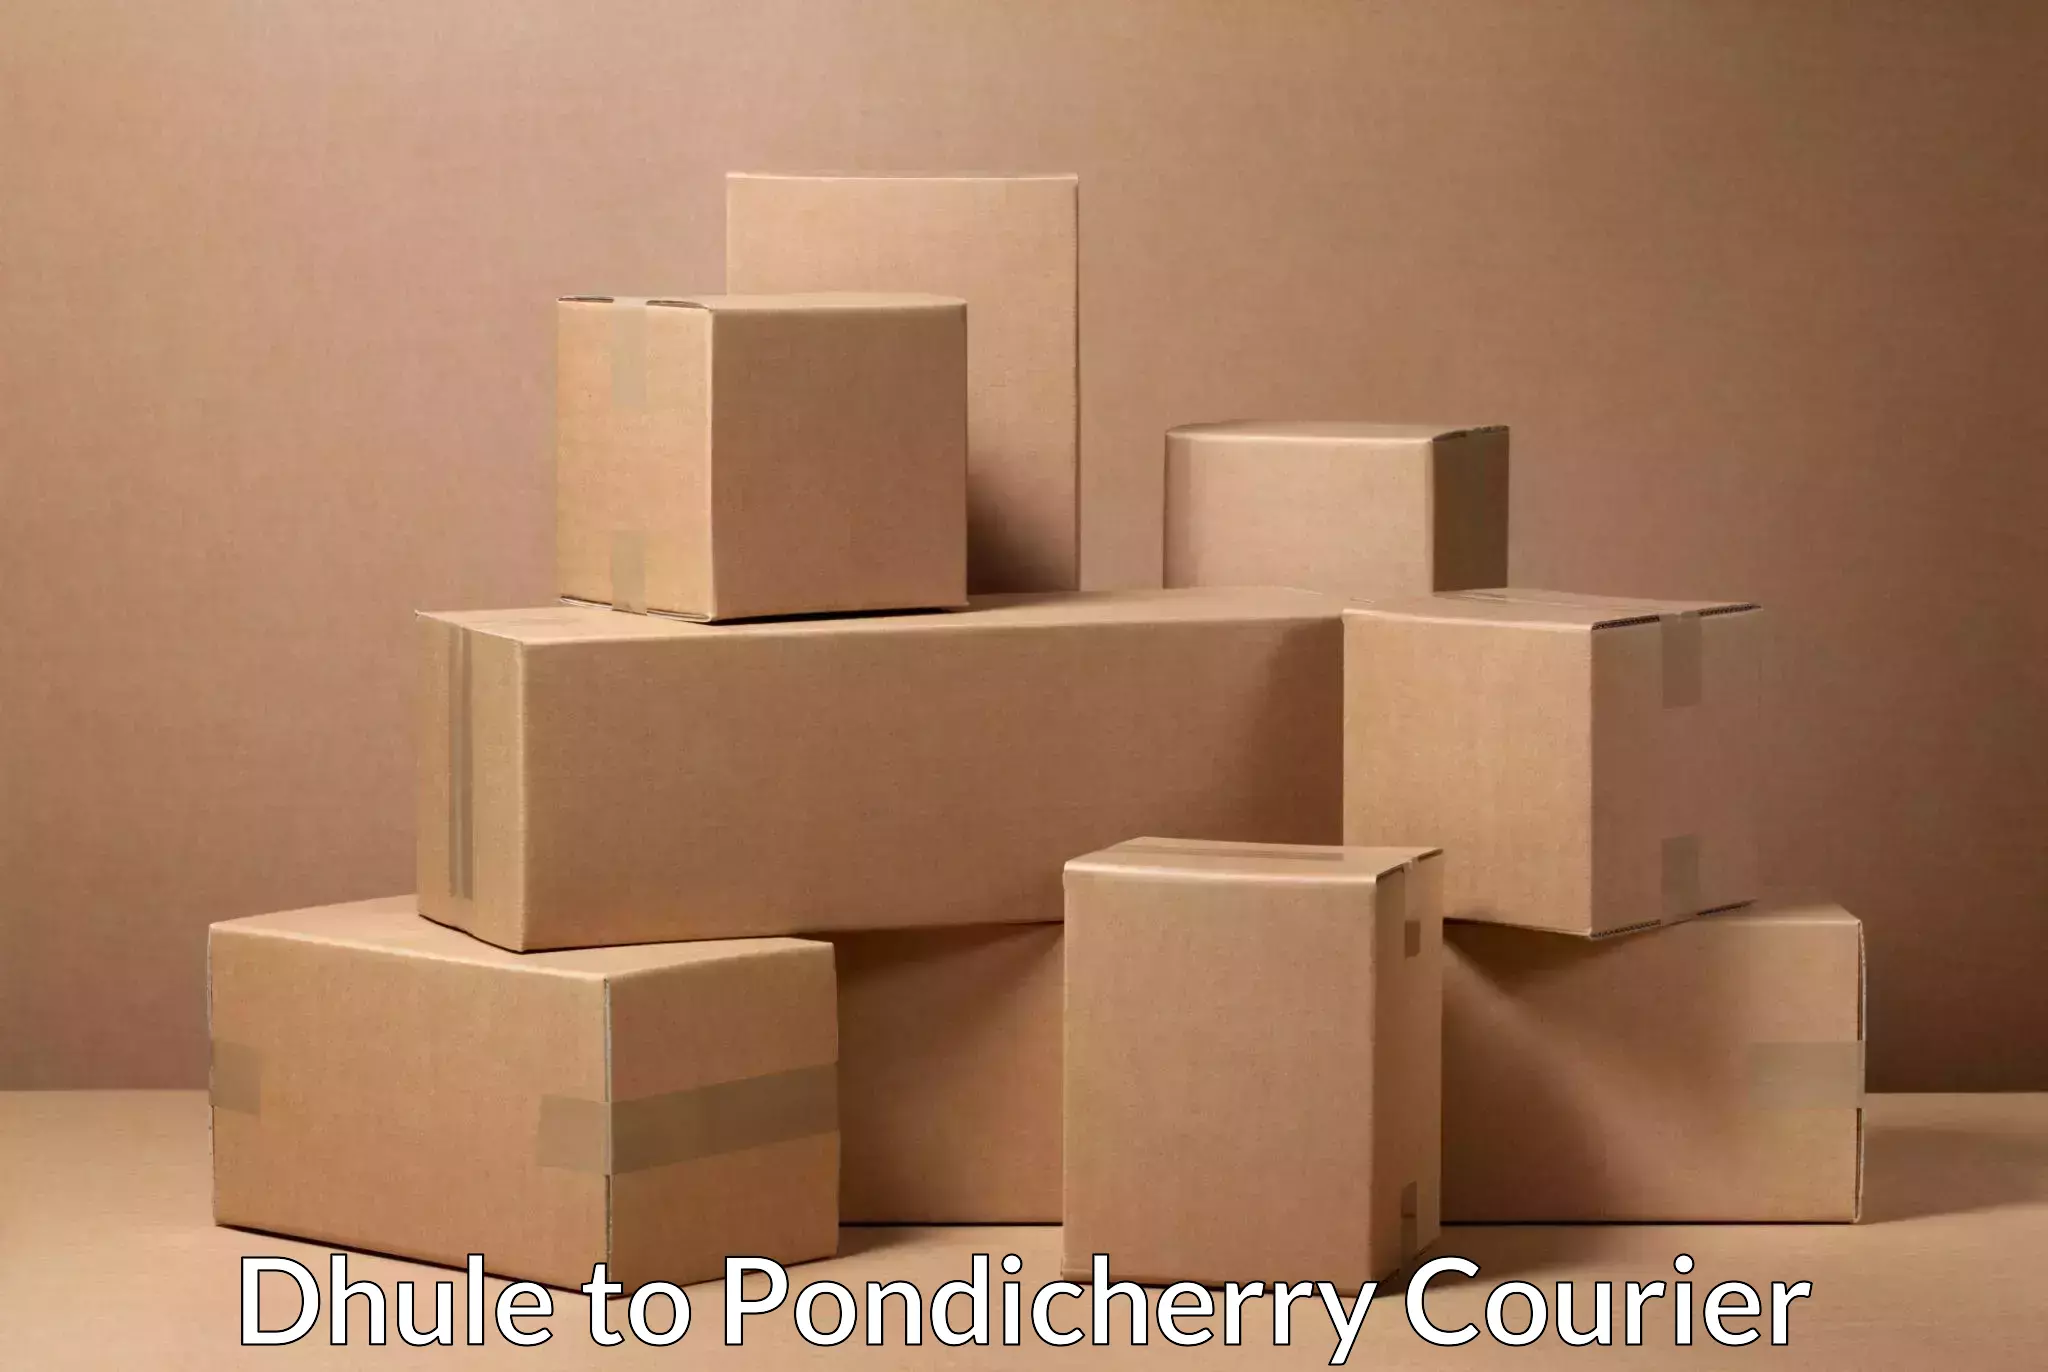 Cash on delivery service Dhule to Pondicherry University